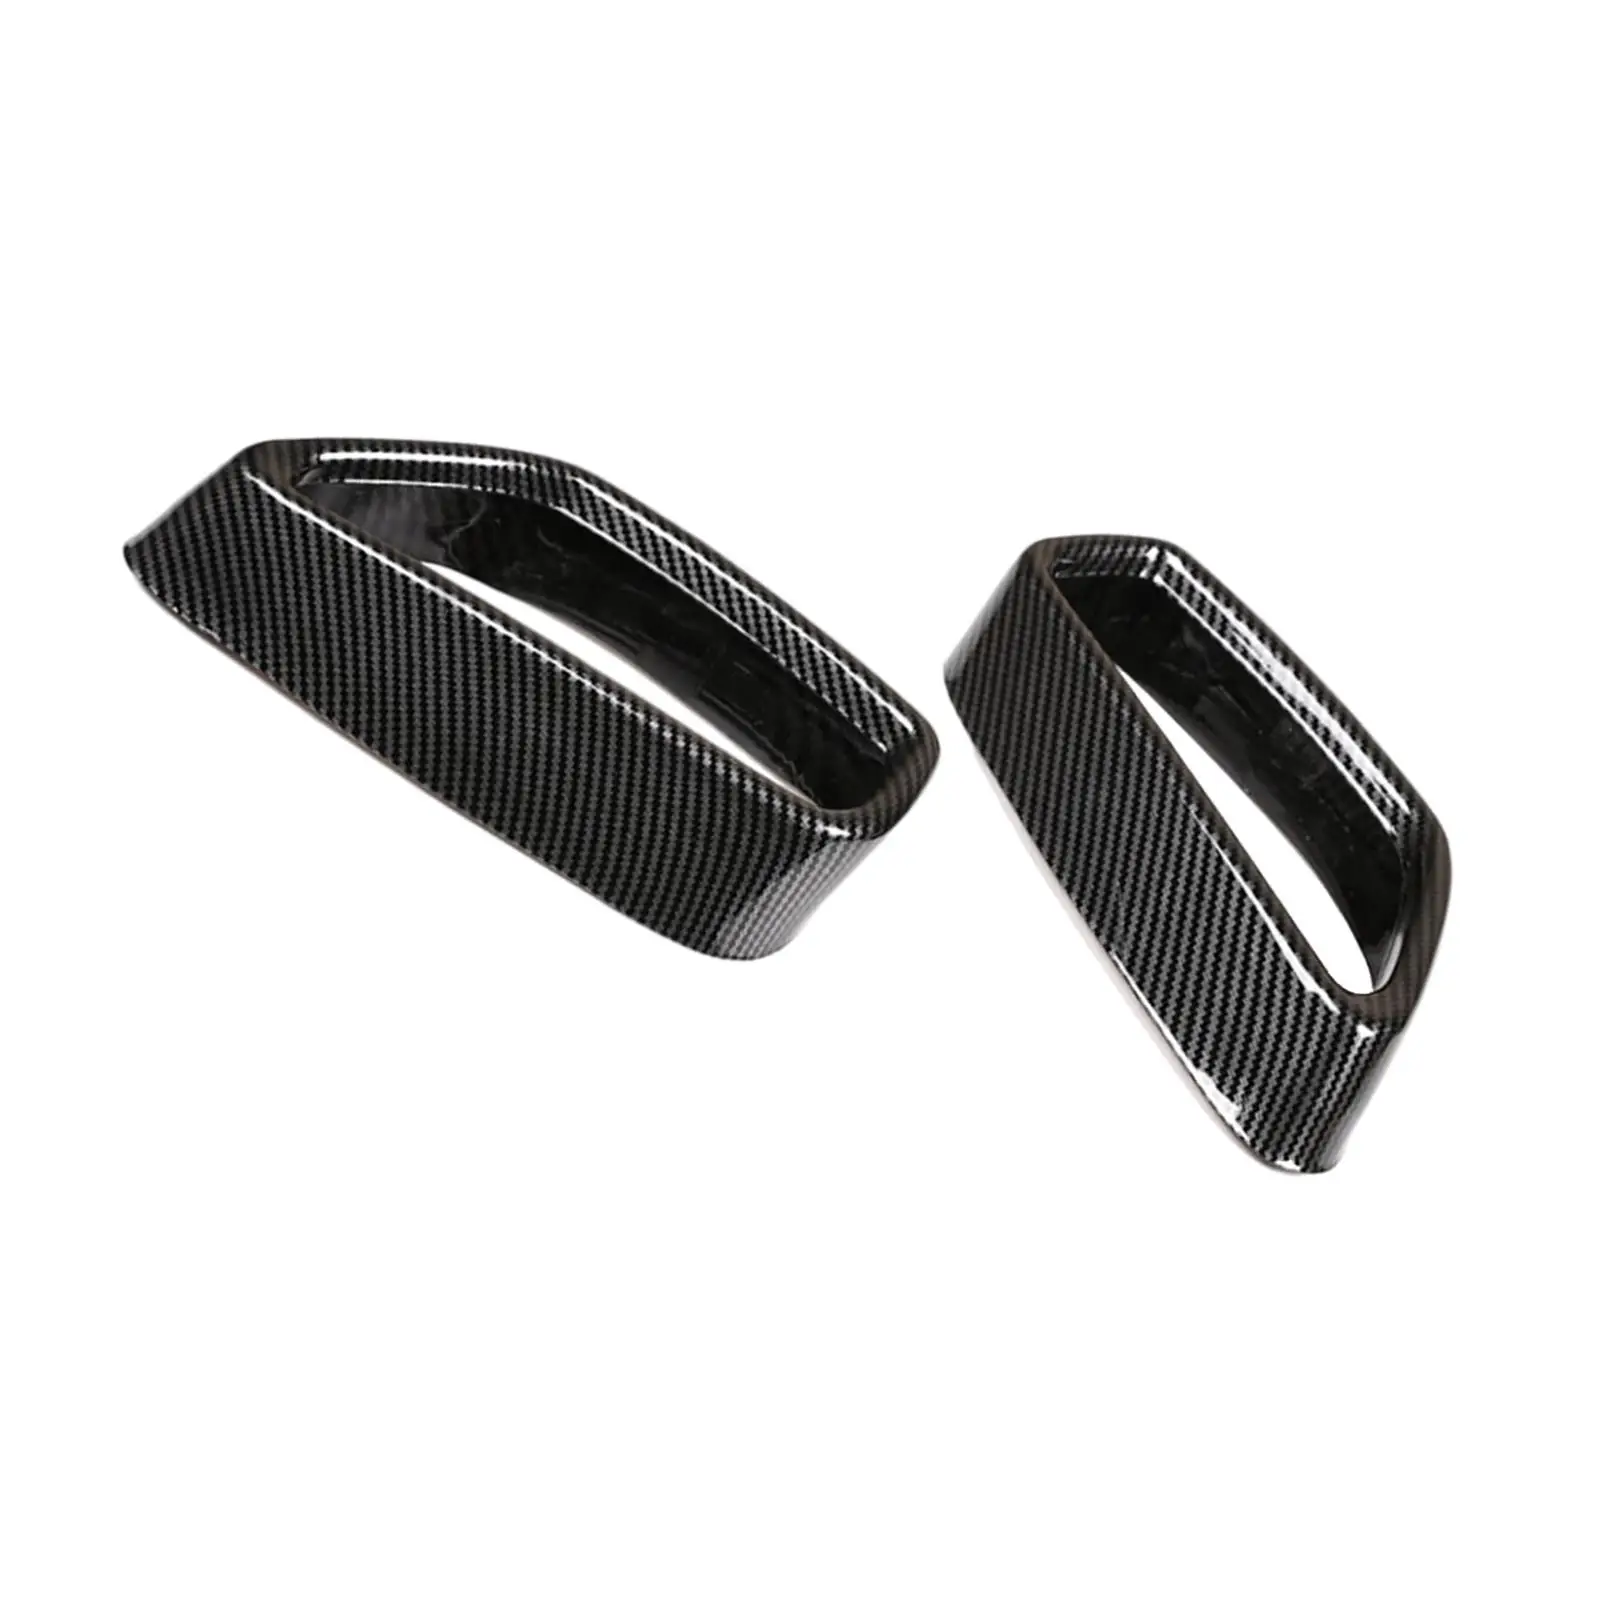 2 PCS Tail Throat Frame Car Rear Exhaust Pipe Cover Trim fits for BMW 5 Series G30 G38 2018-2021